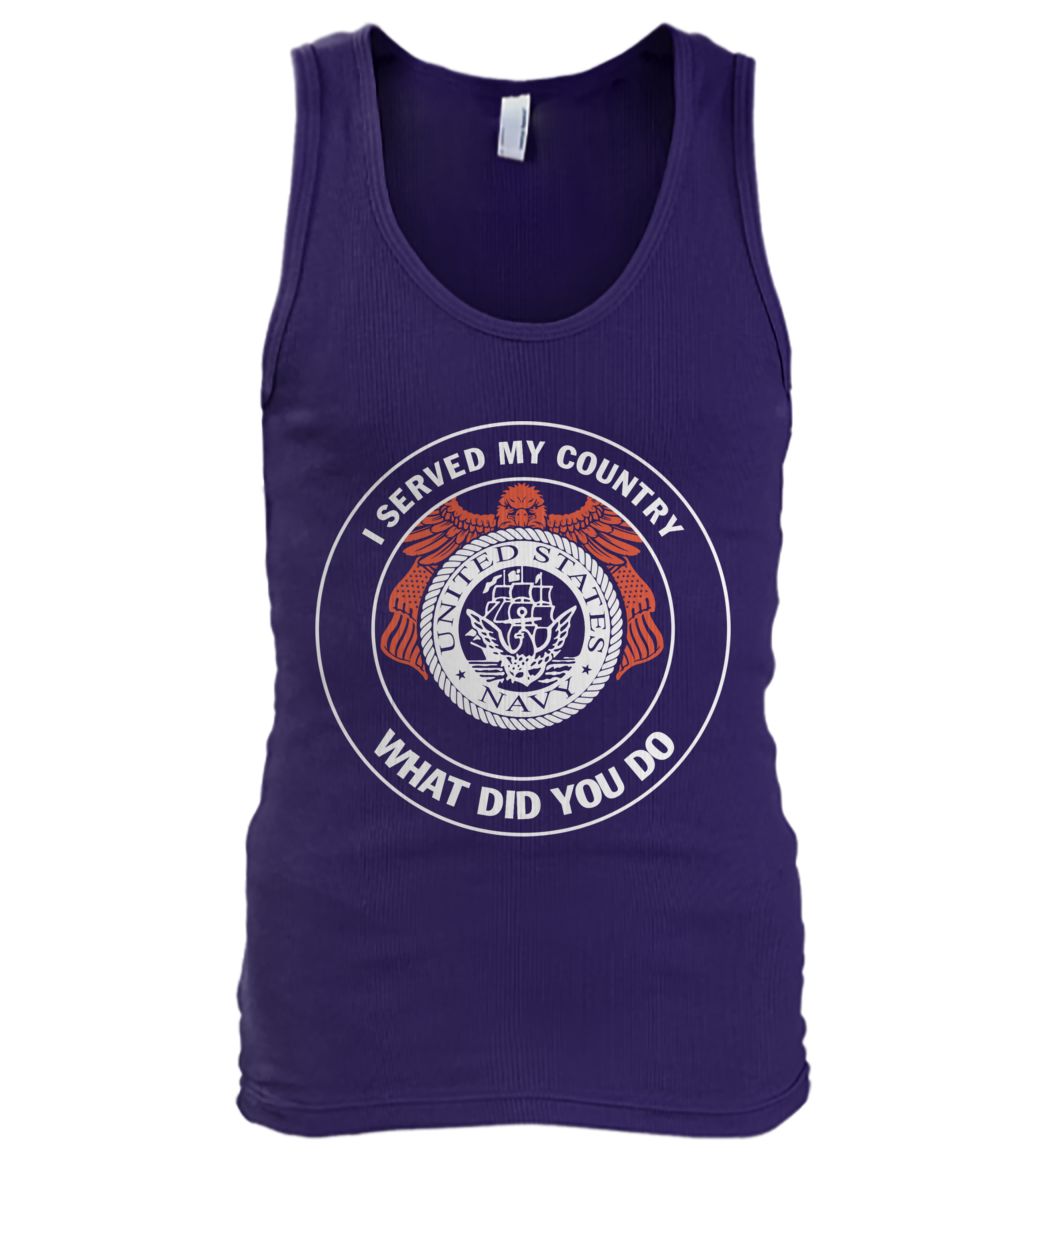 I served my country united states navy what did you do men's tank top